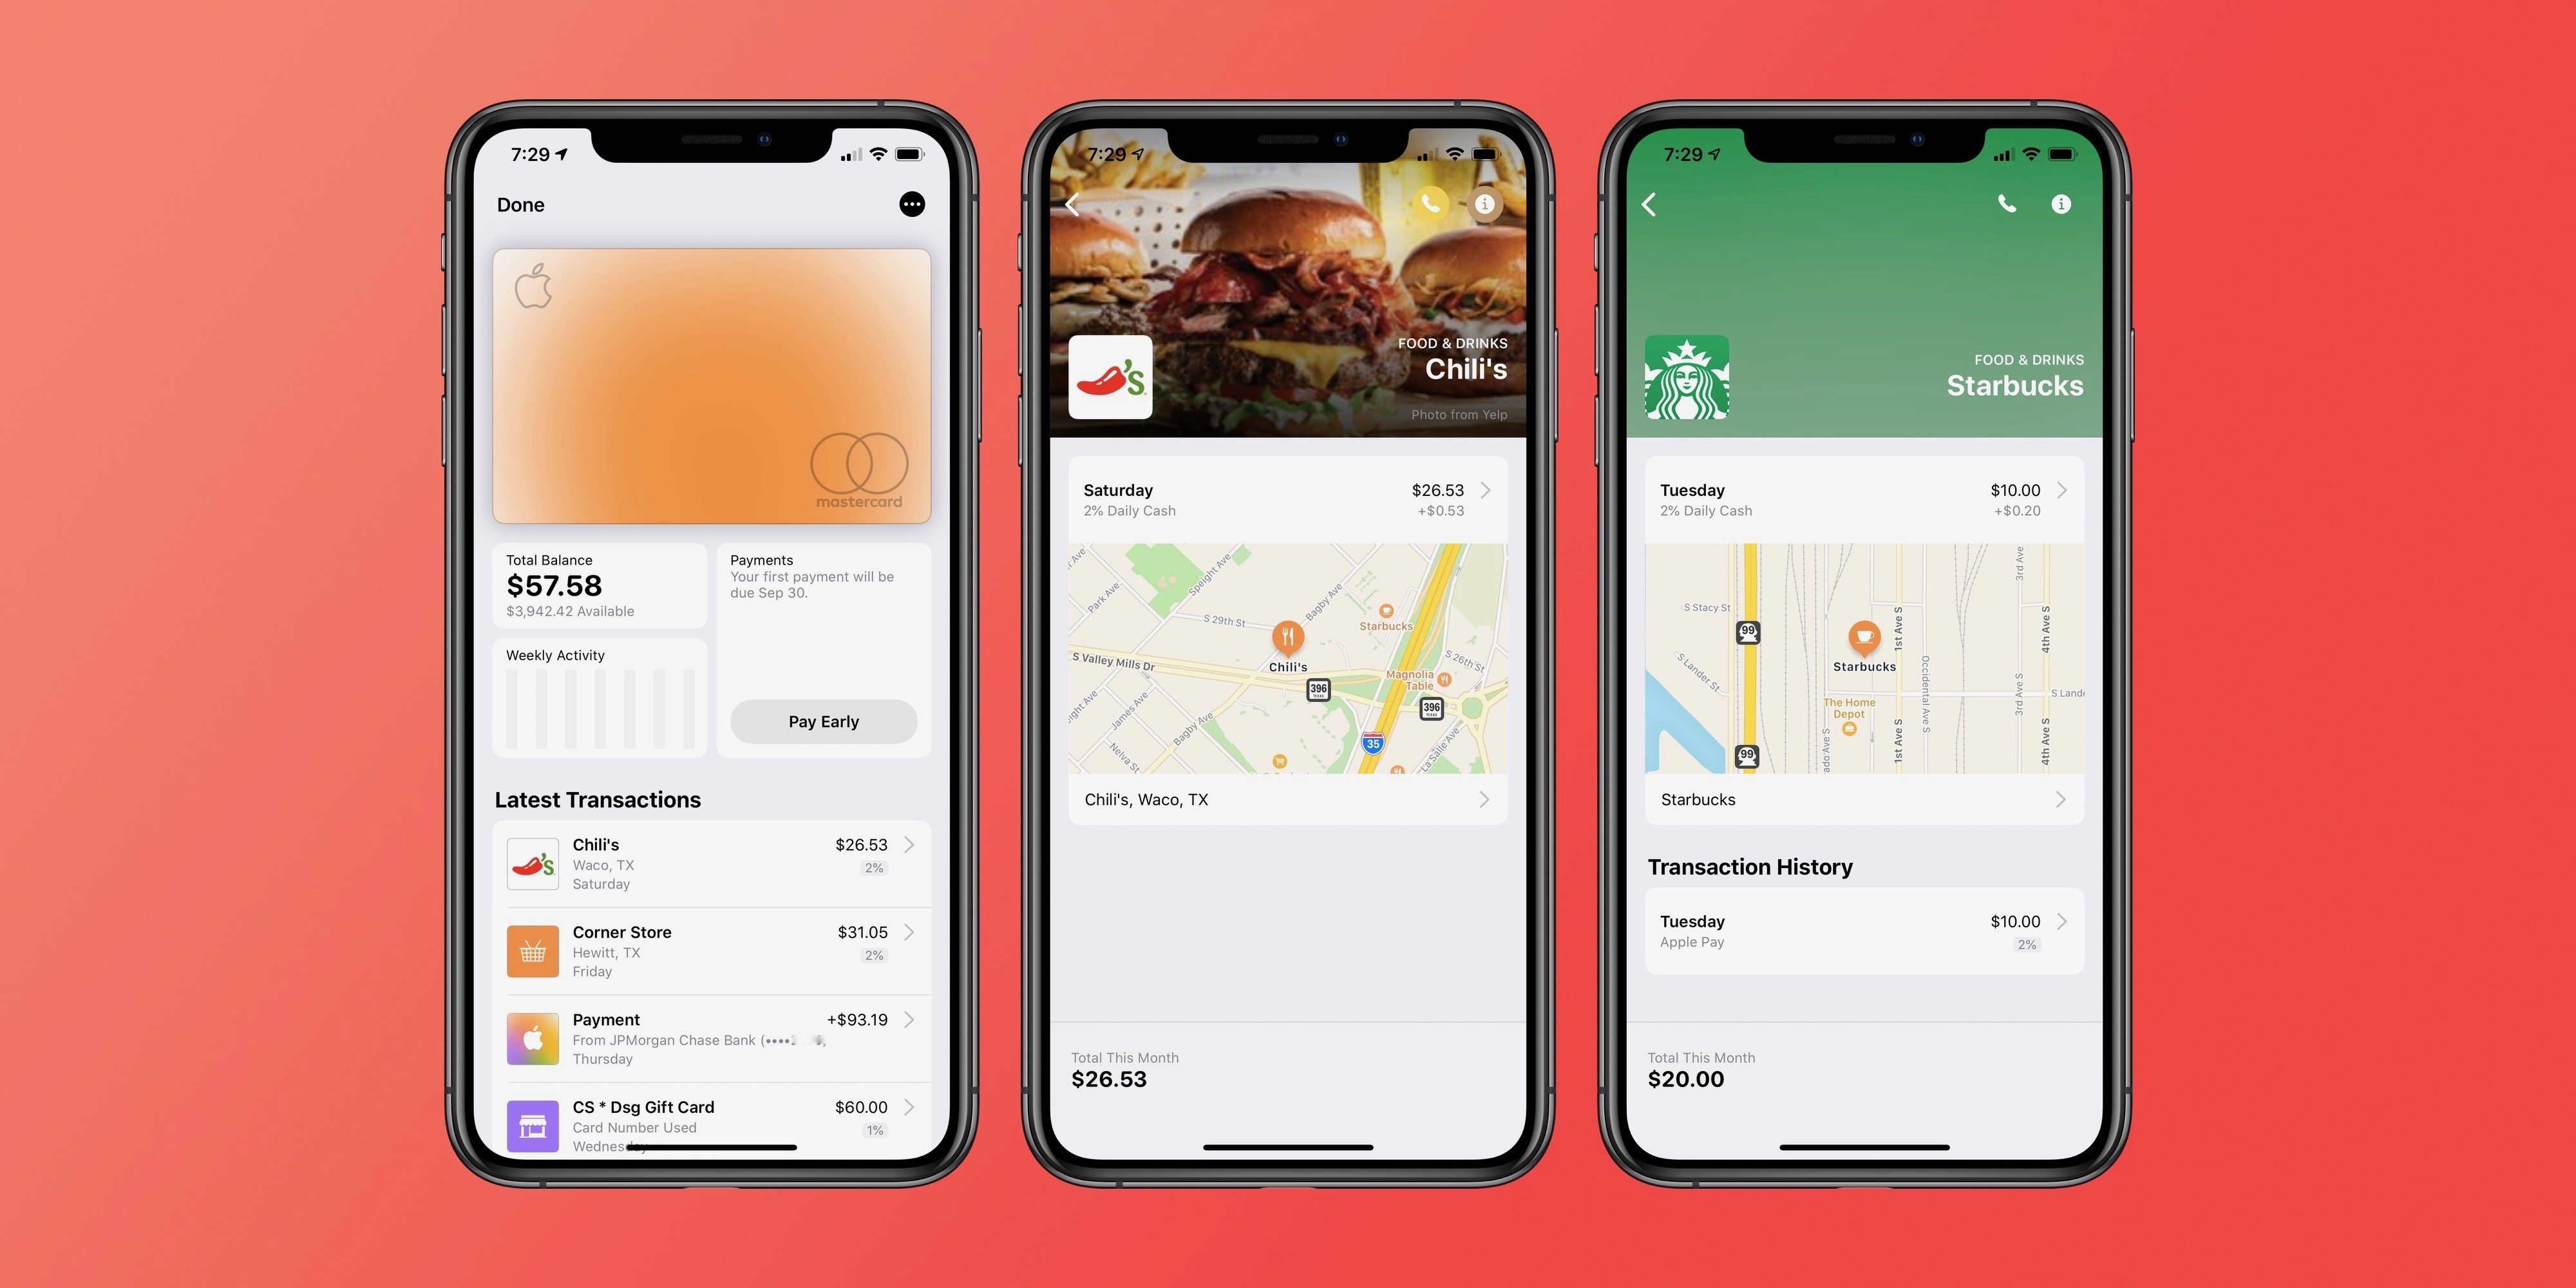 Apple Card: How to Track and Manage Daily Cash Rewards